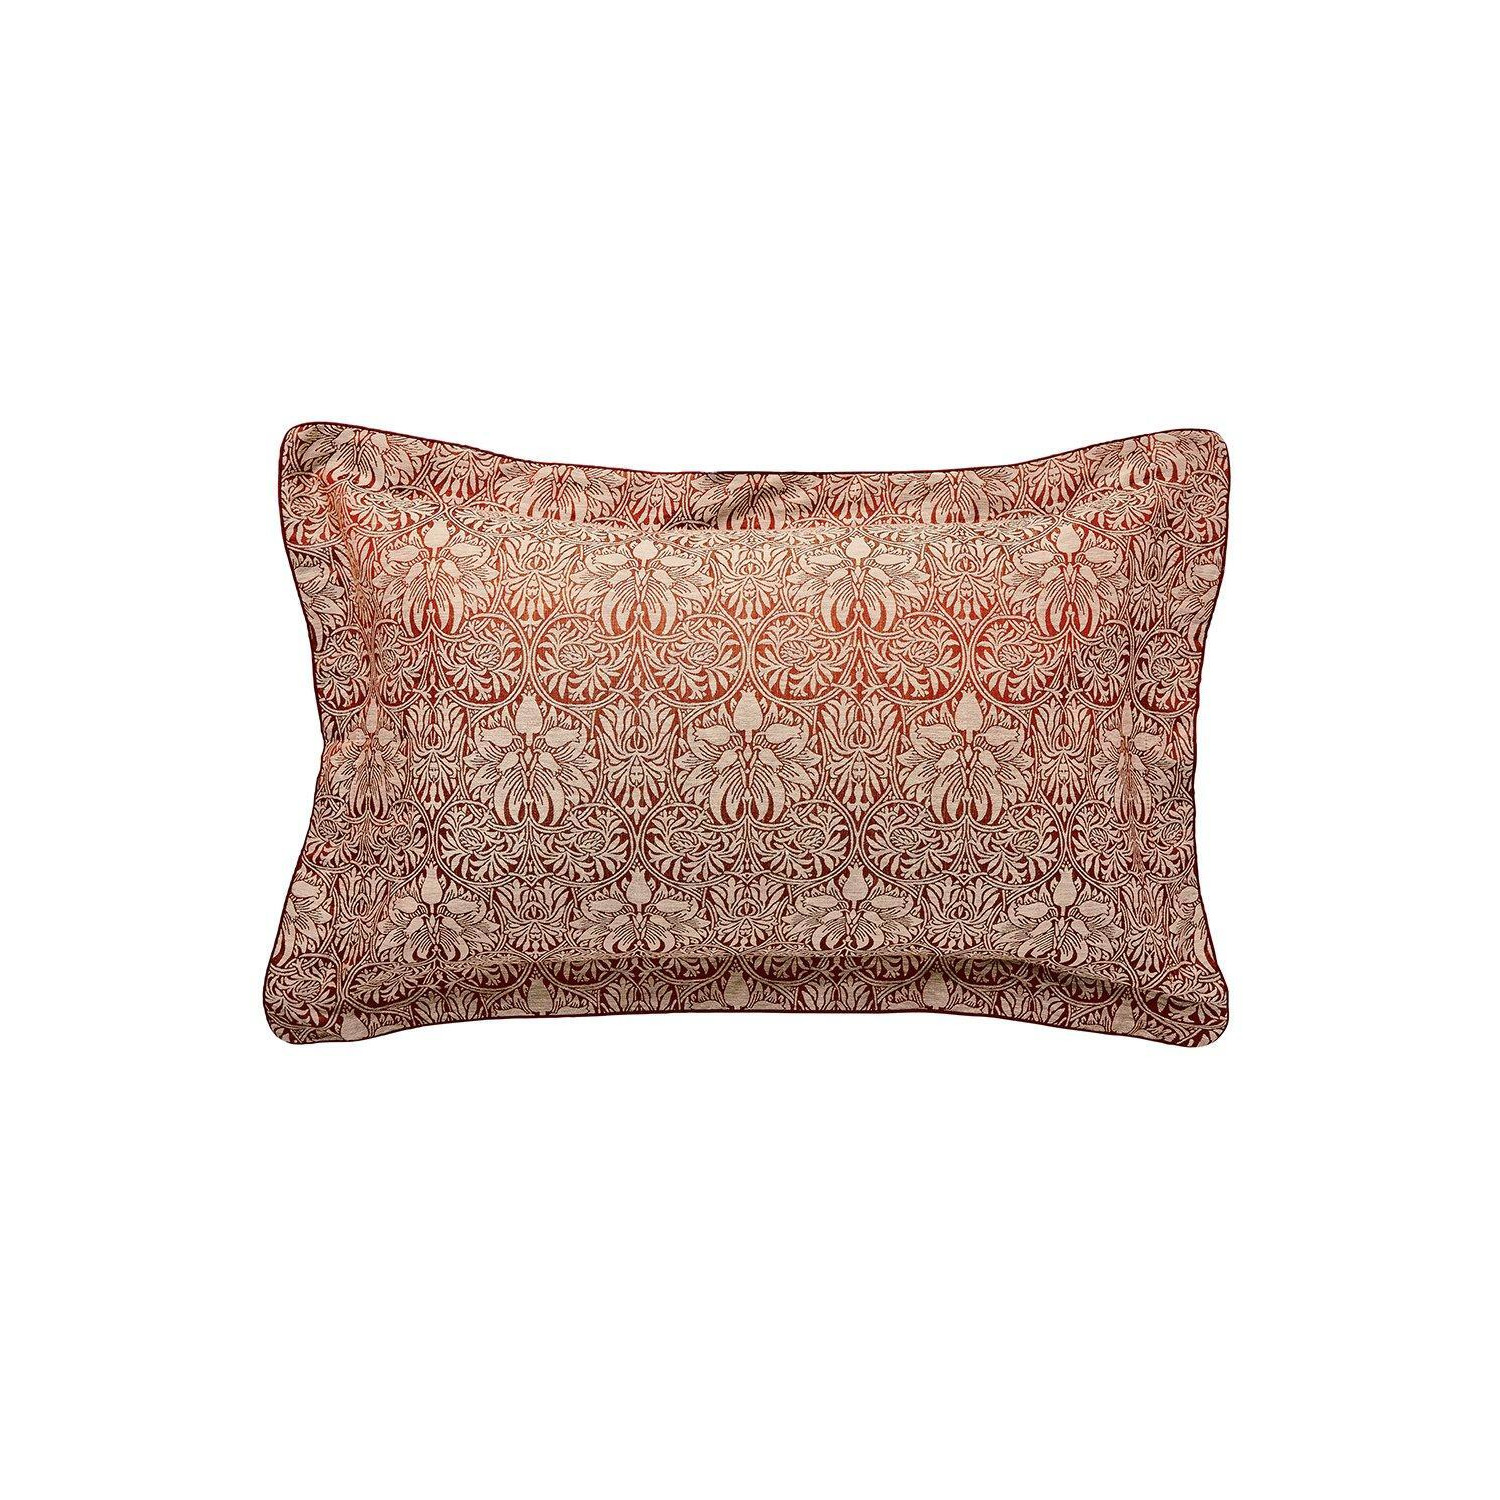 'Crown Imperial' Oxford Pillowcase - image 1